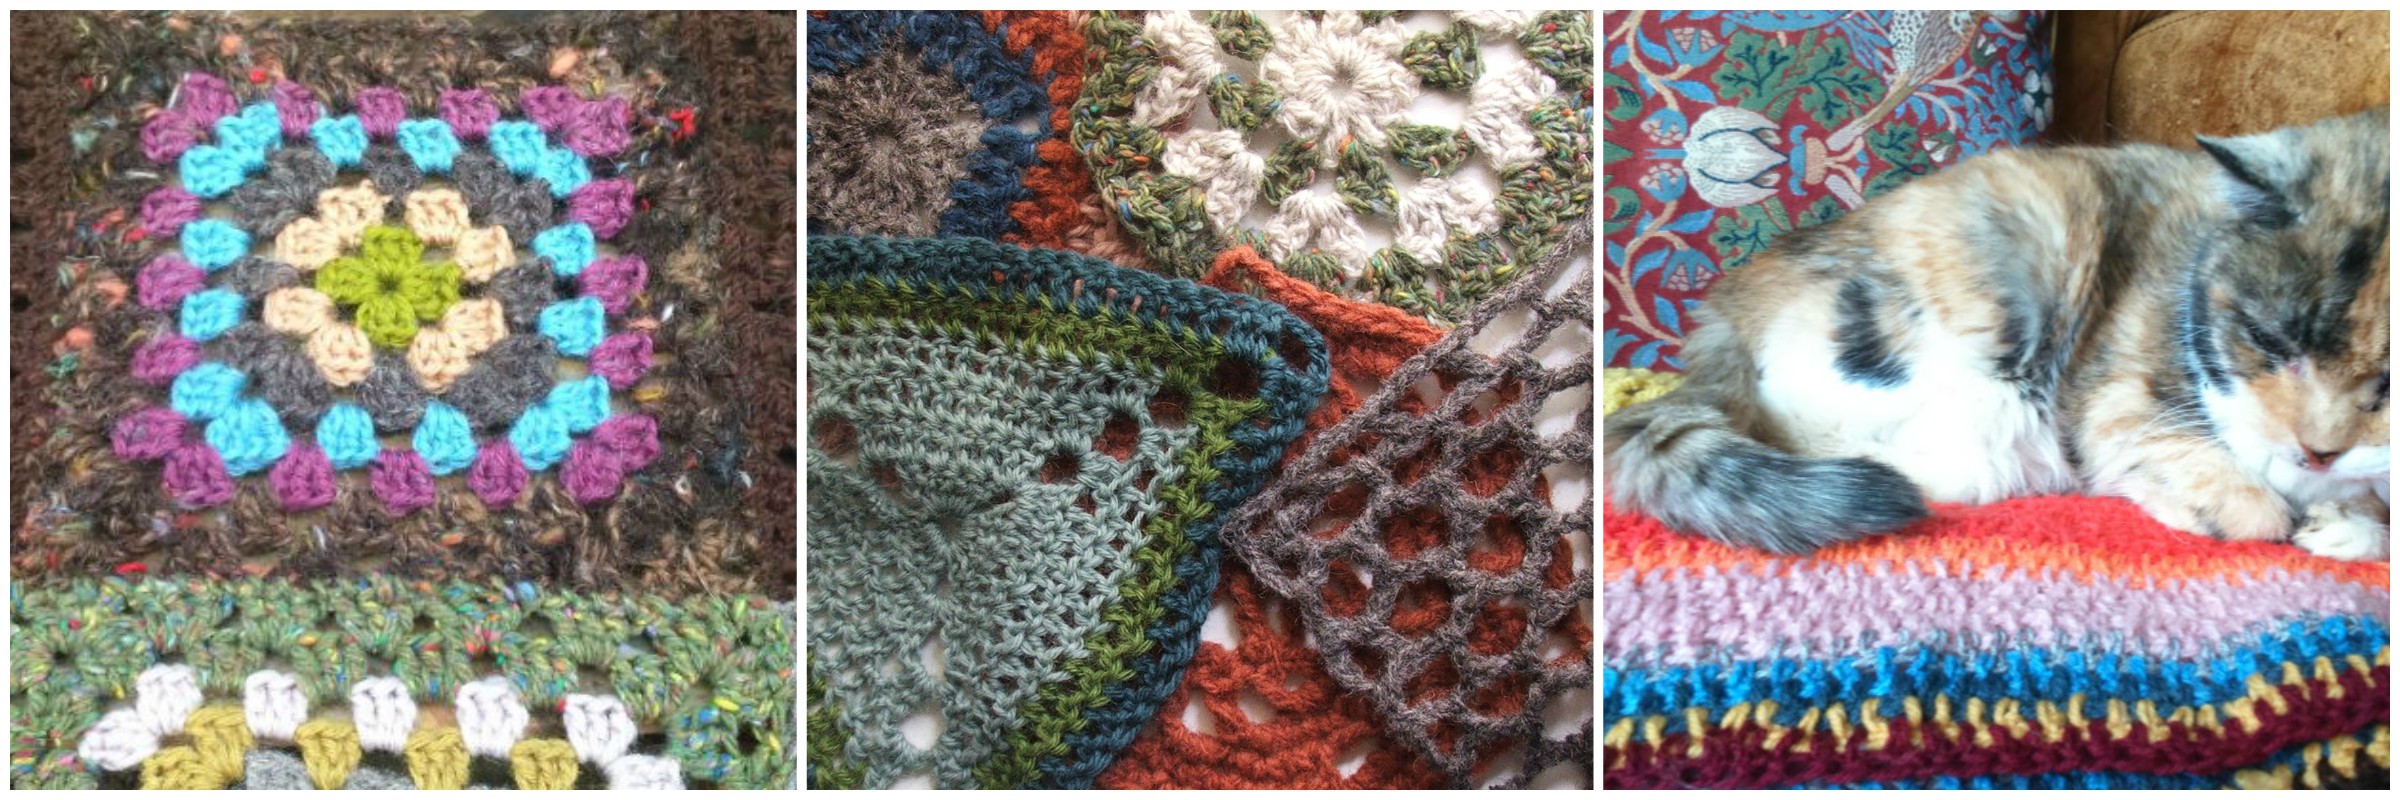 It's Easy to Learn Crochet: More Than You Think - Liz Pearson Mann